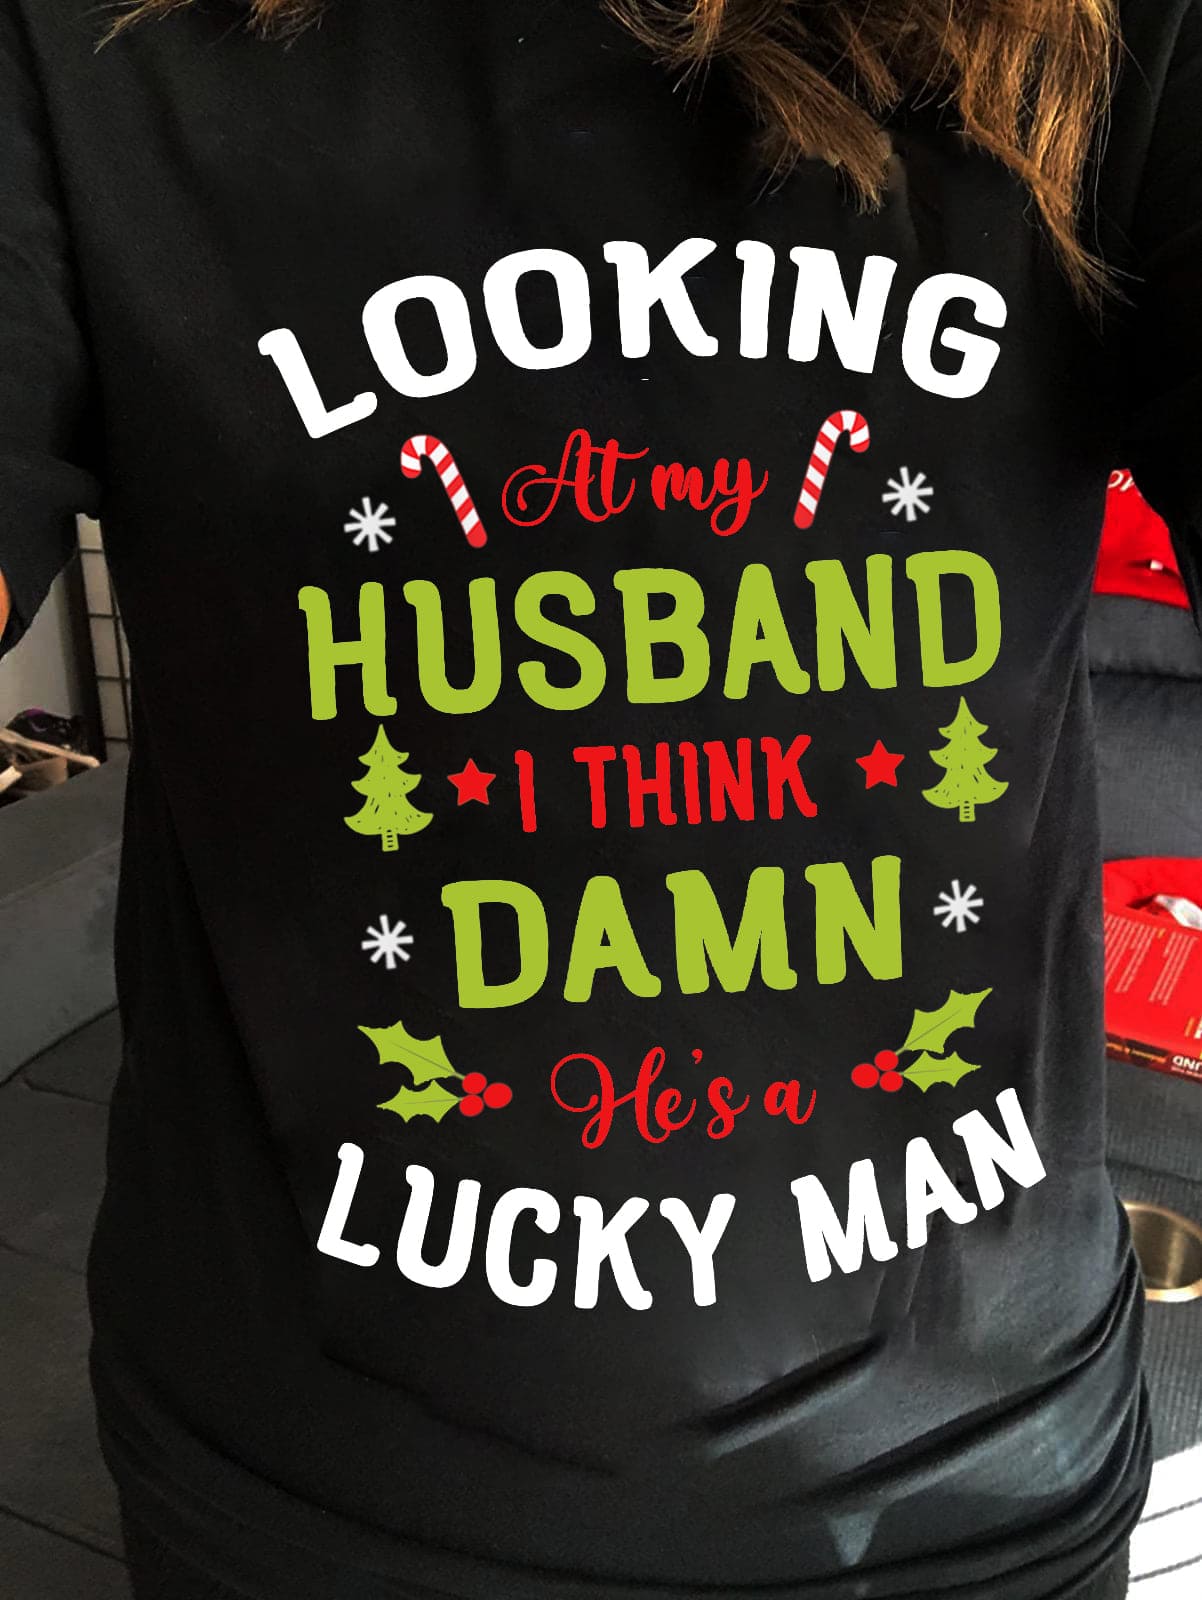 Looking at my husband I think damn he's a lucky man - Christmas gift for husband, husband and wife T-shirt